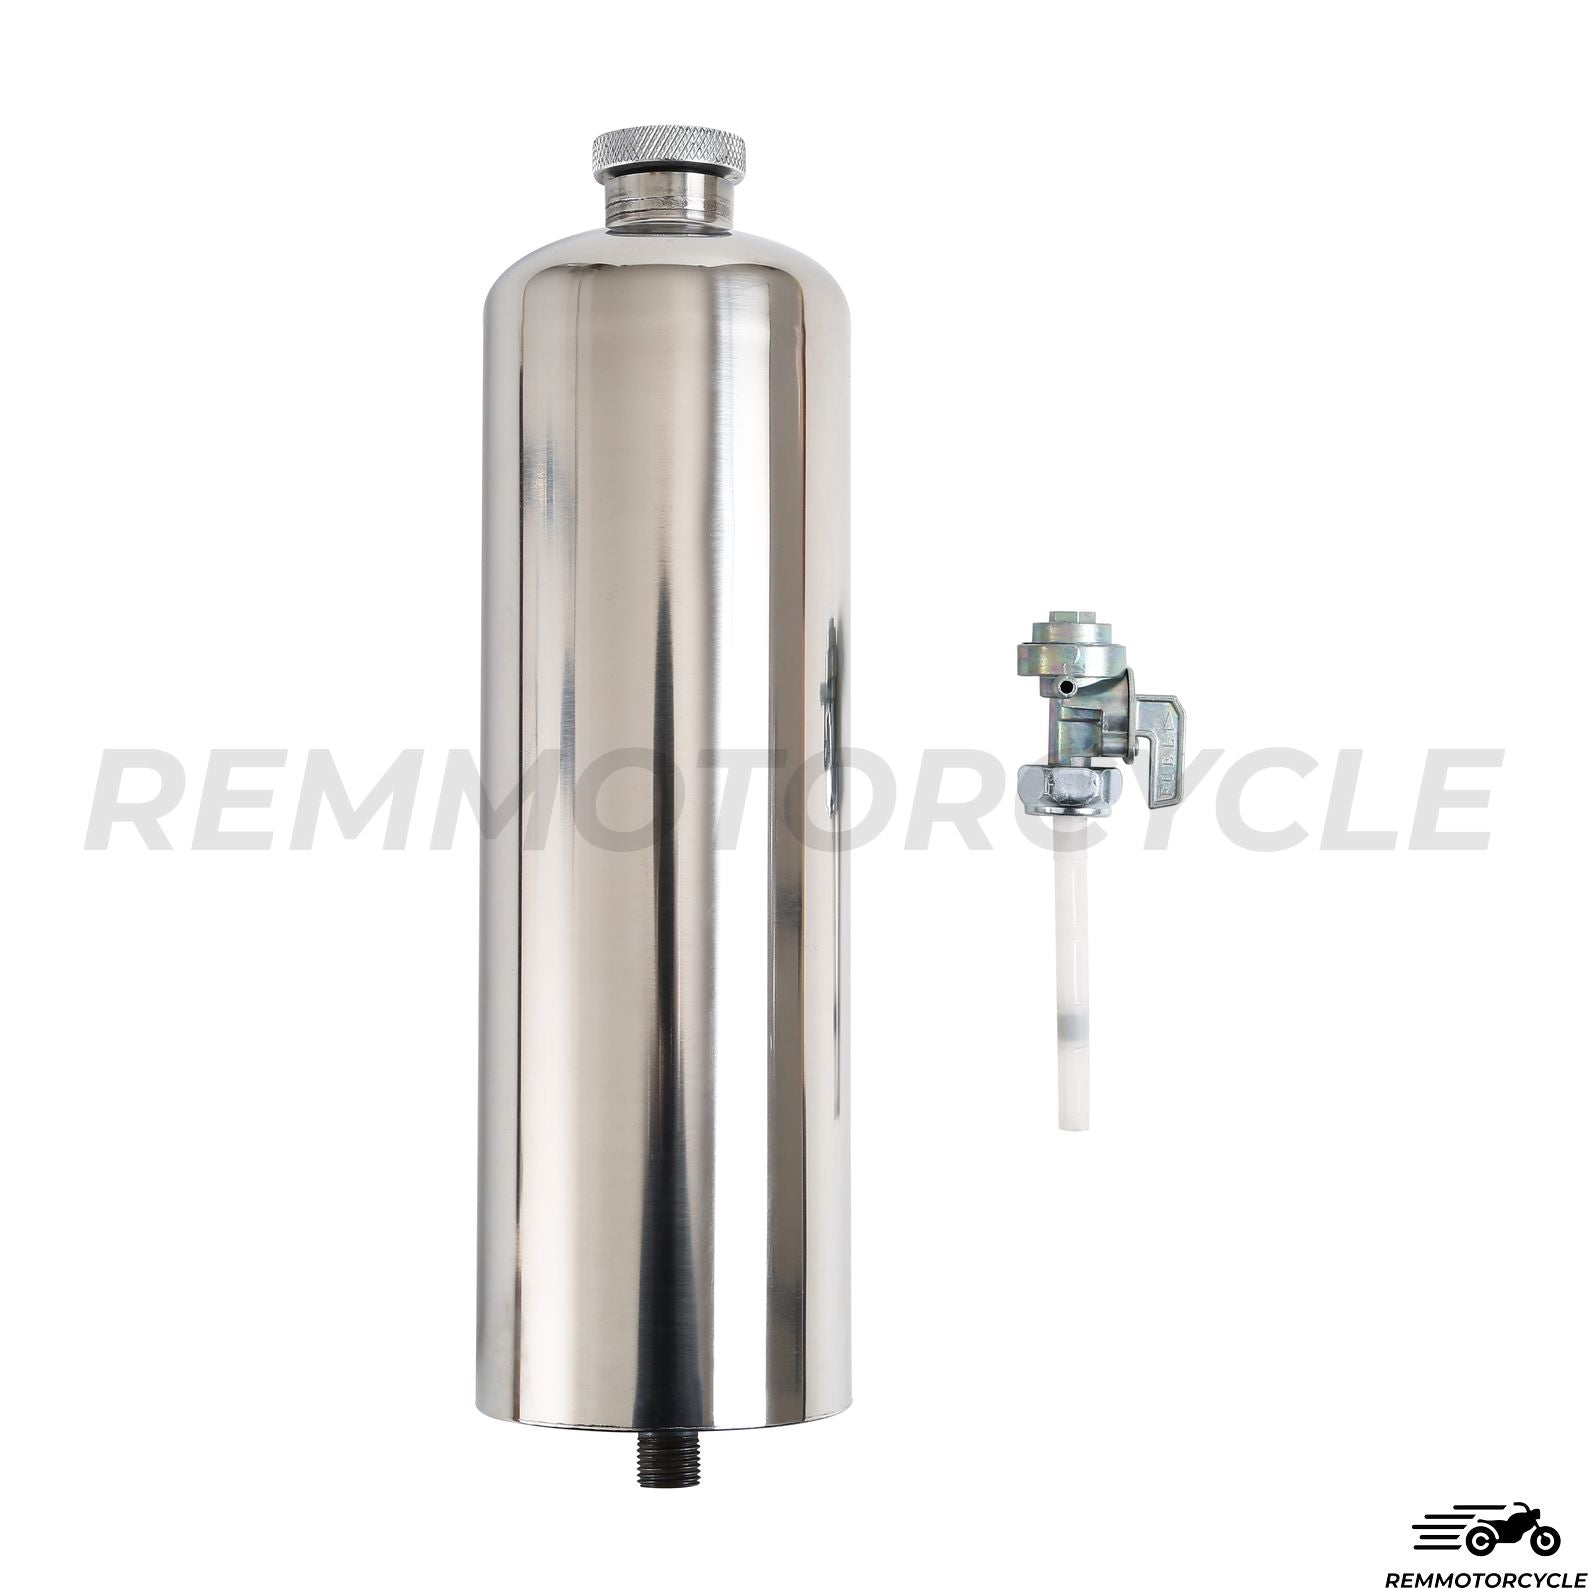 Additional motorcycle gas tank Bottle with tap and cap